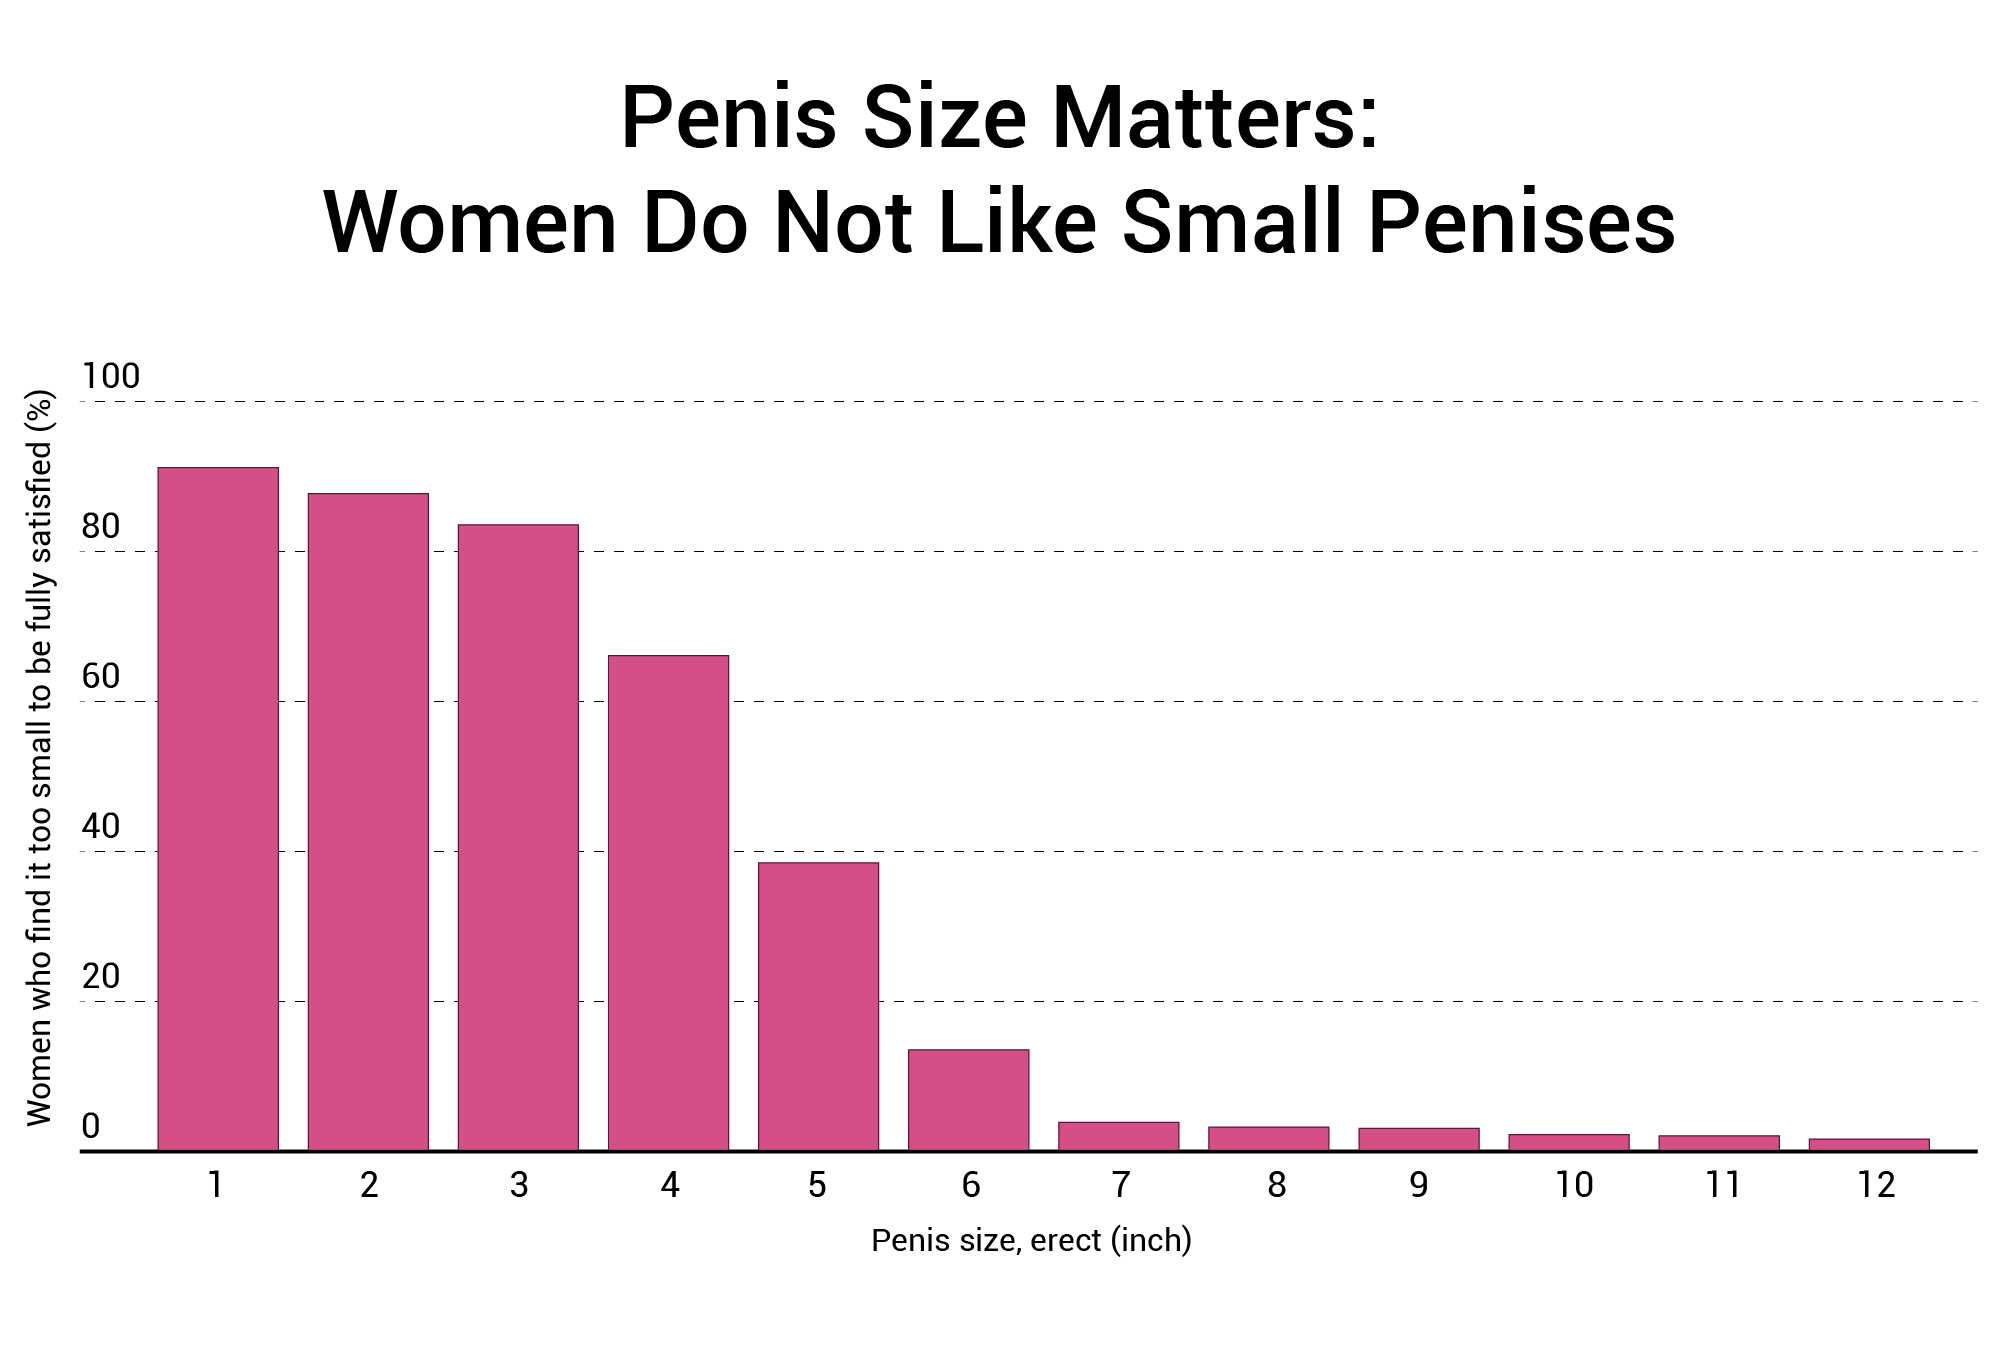 Does Size Matter? 91.7% Of Women Say It Does 1,387 Woman Study pic